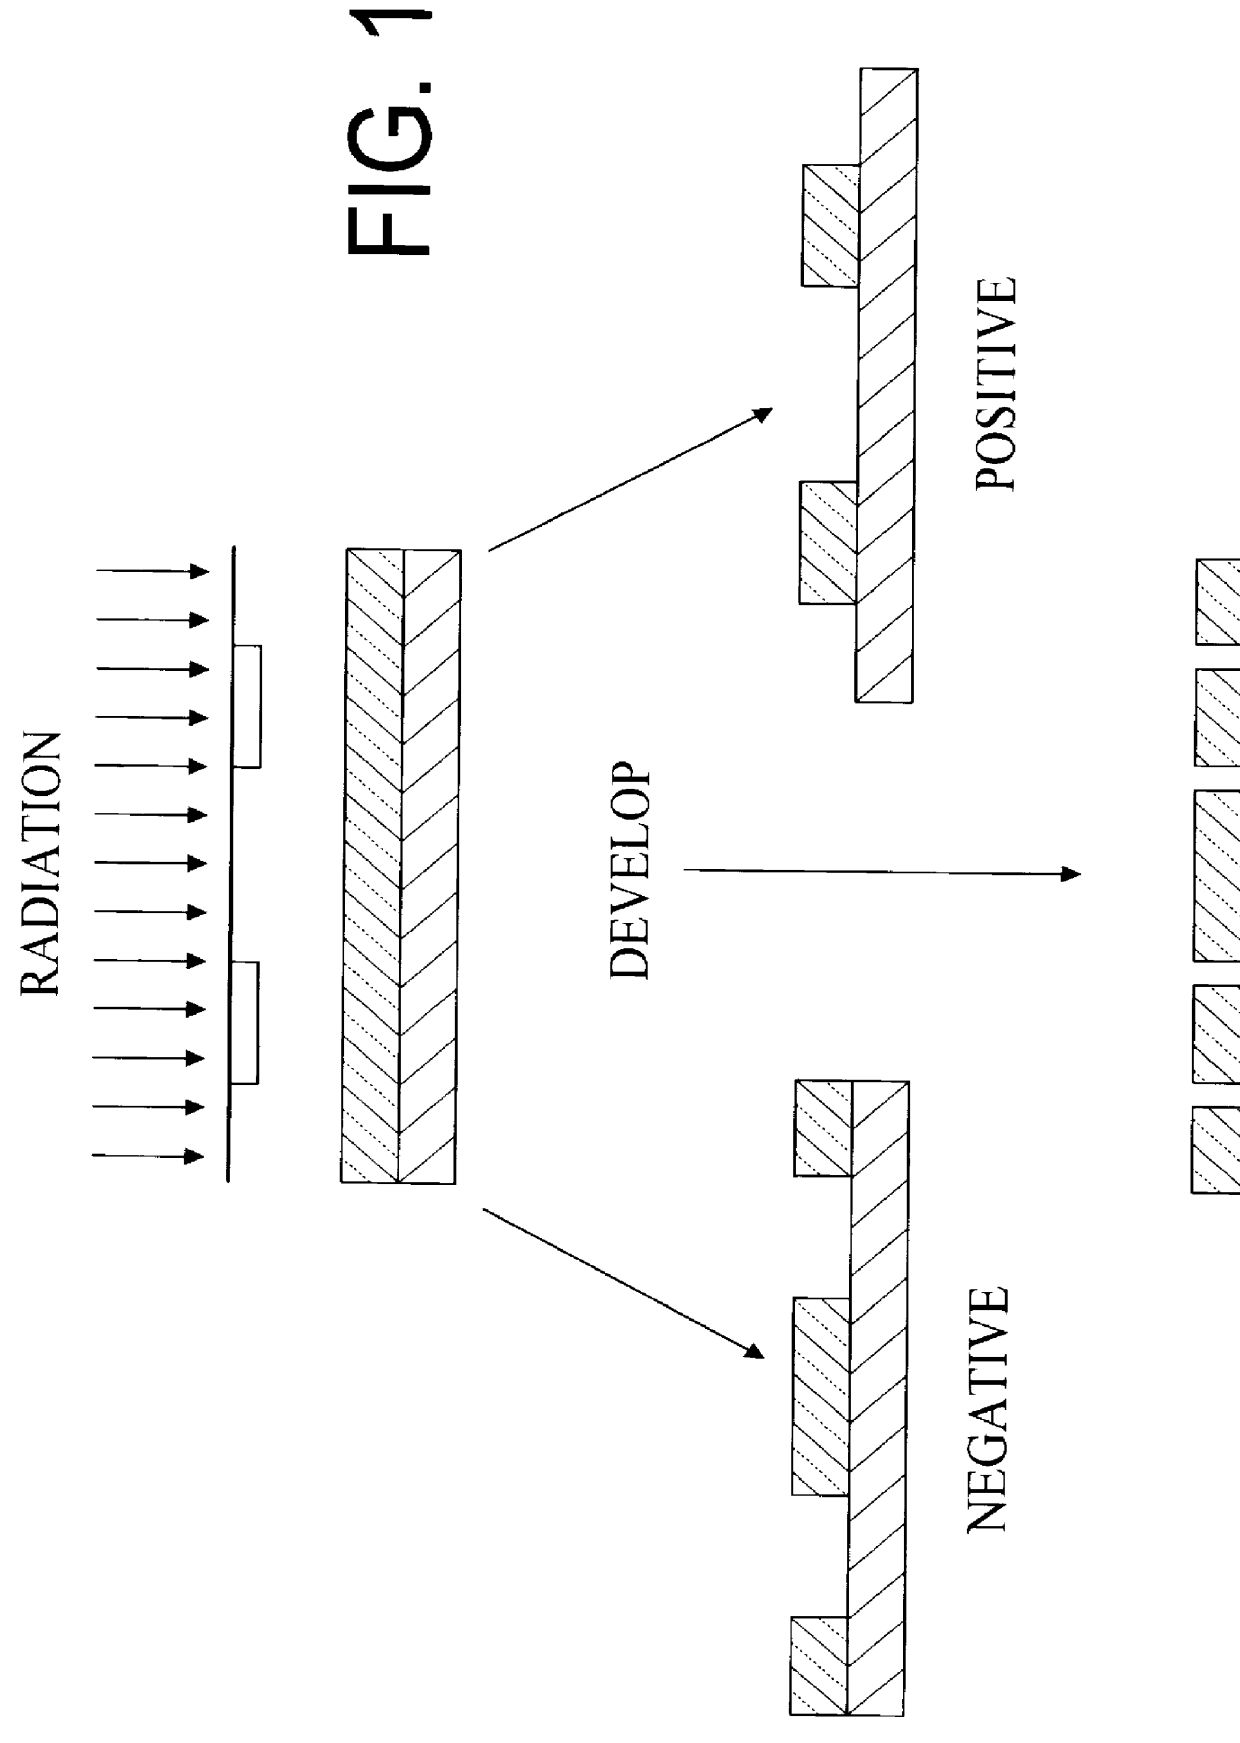 Method and structure to reduce latch-up using edge implants